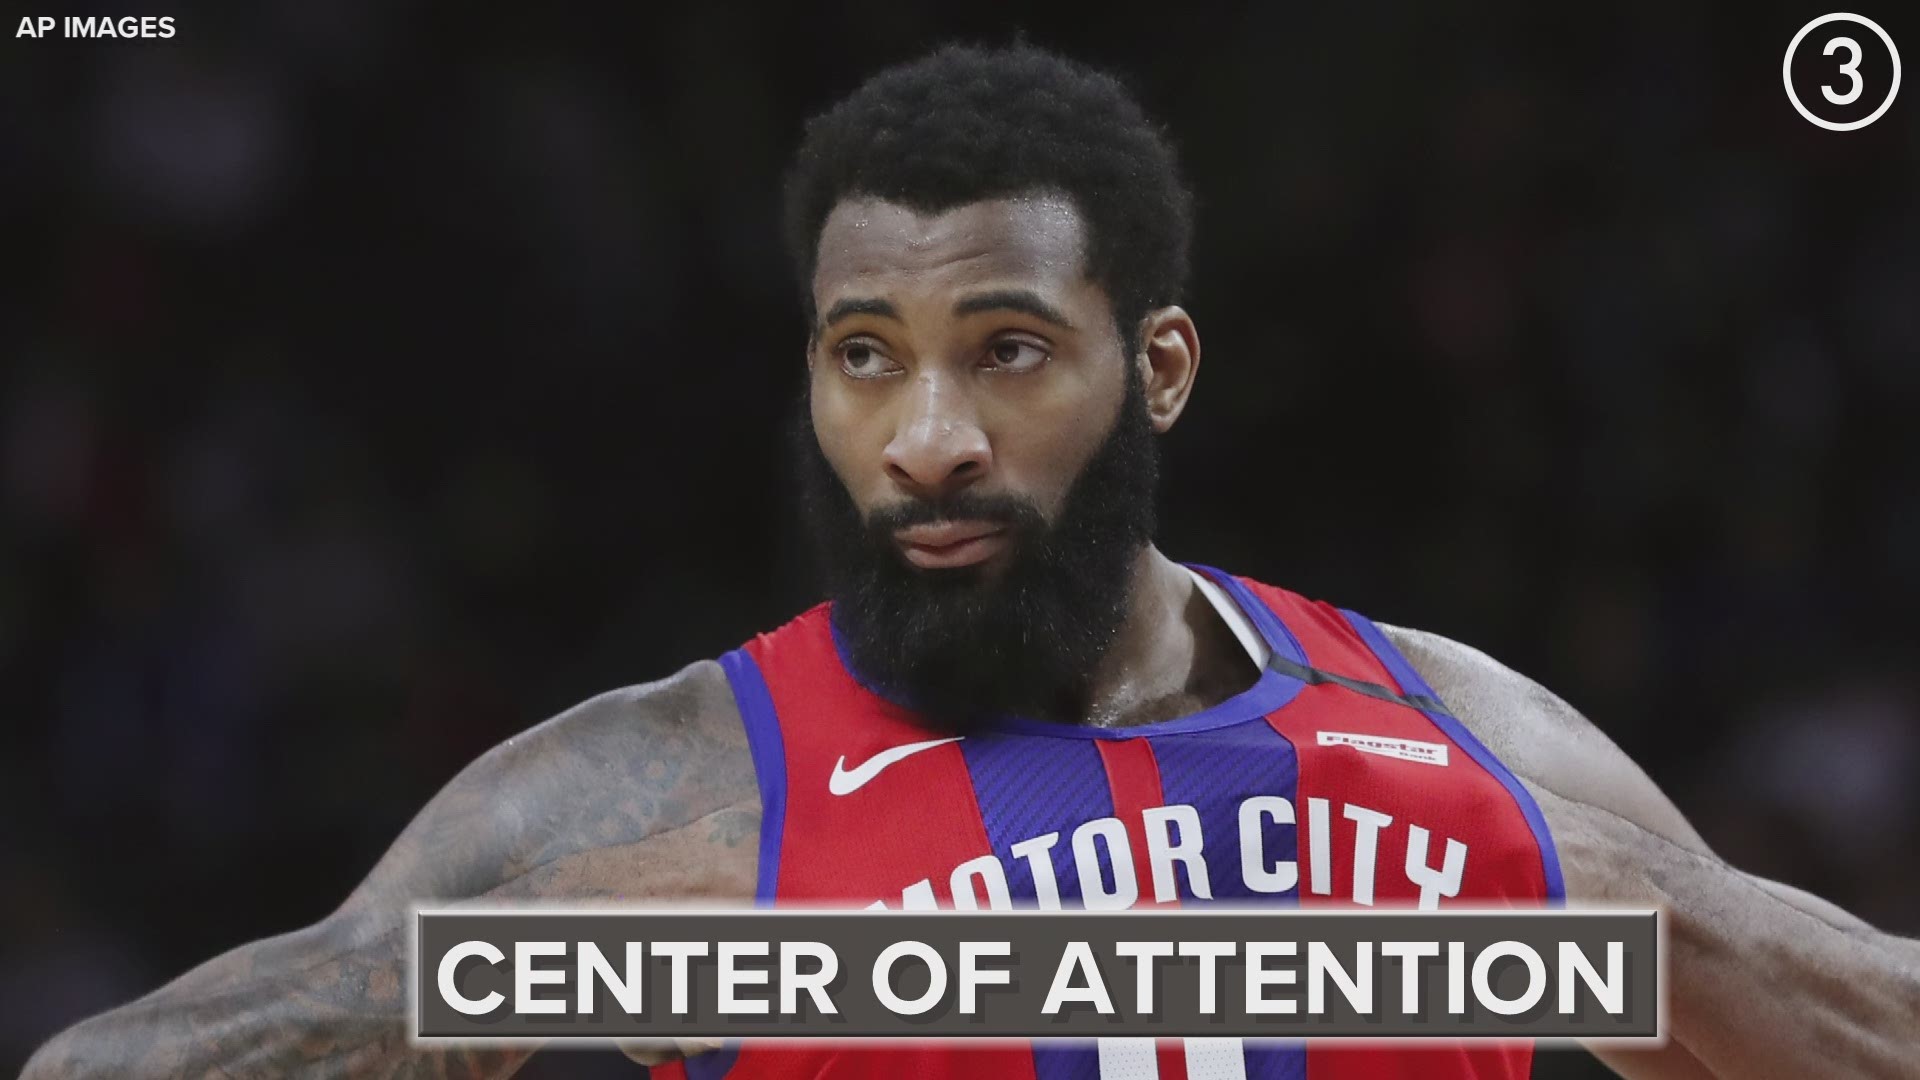 Center of Attention!  According to ESPN's Adrian Wojnarowski, the Cleveland Cavaliers have acquired All-Star center Andre Drummond from the Detroit Pistons.